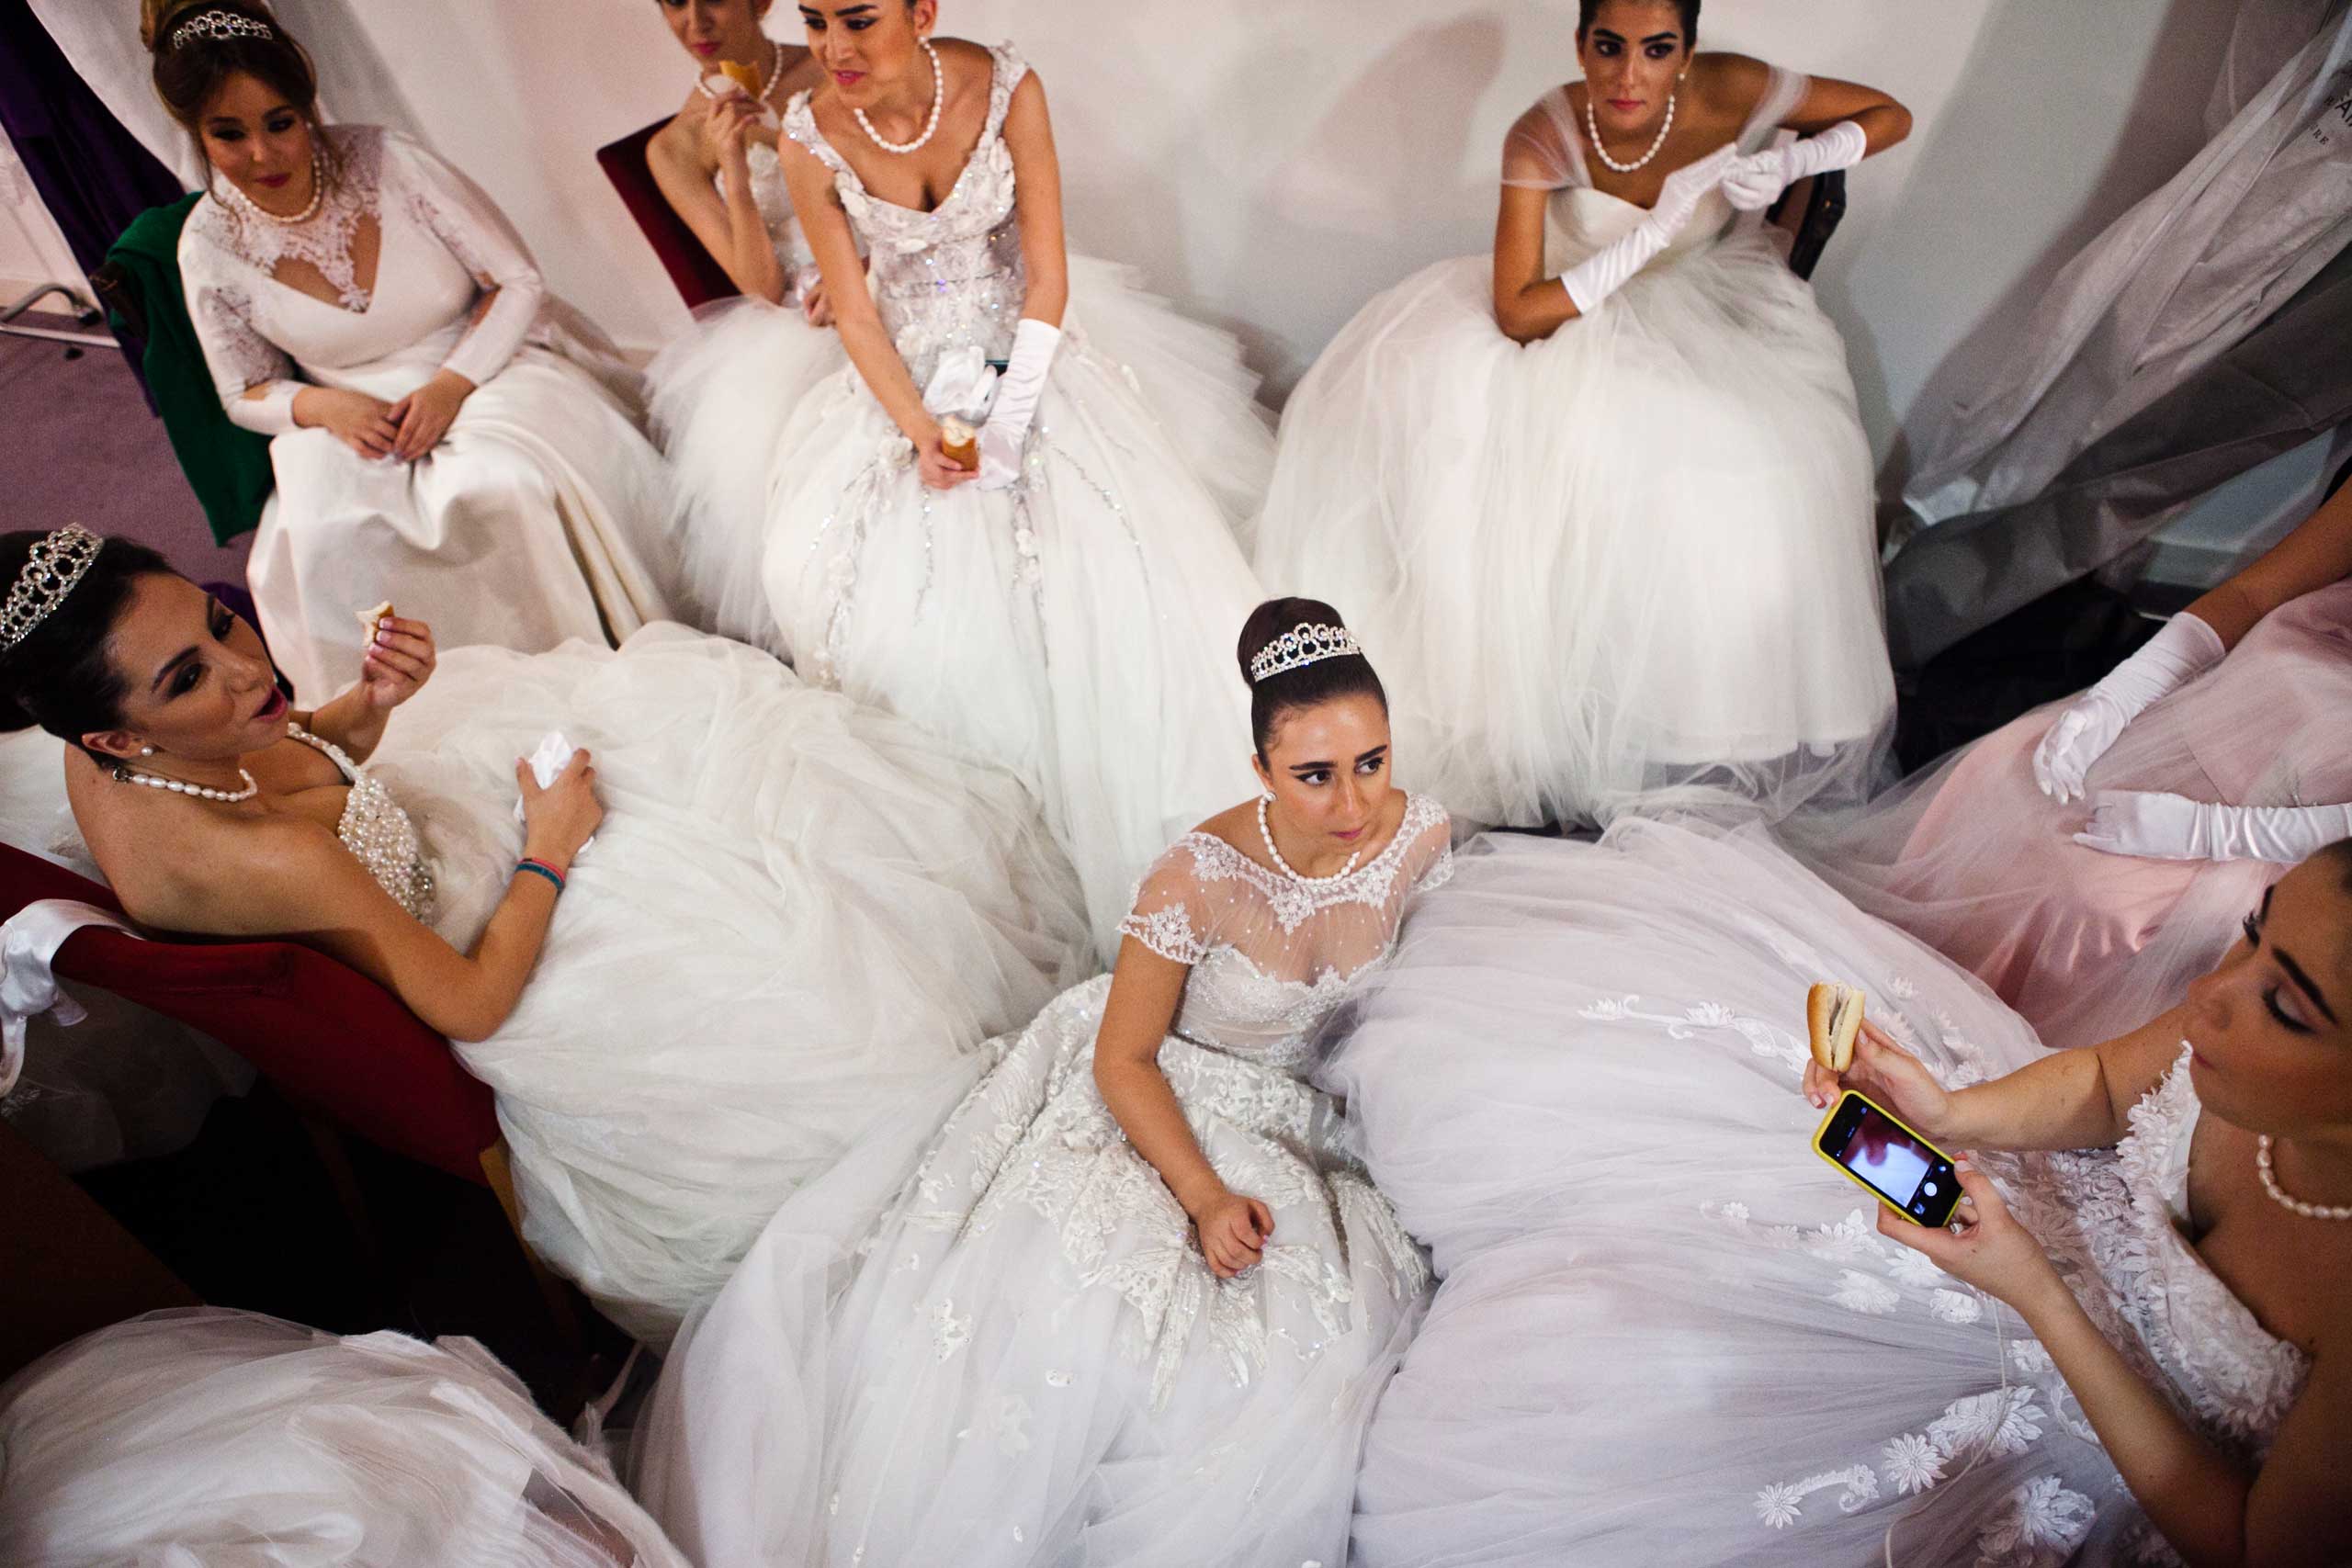 Debutante participants have a snack backstage in the dressing room before the Ball.